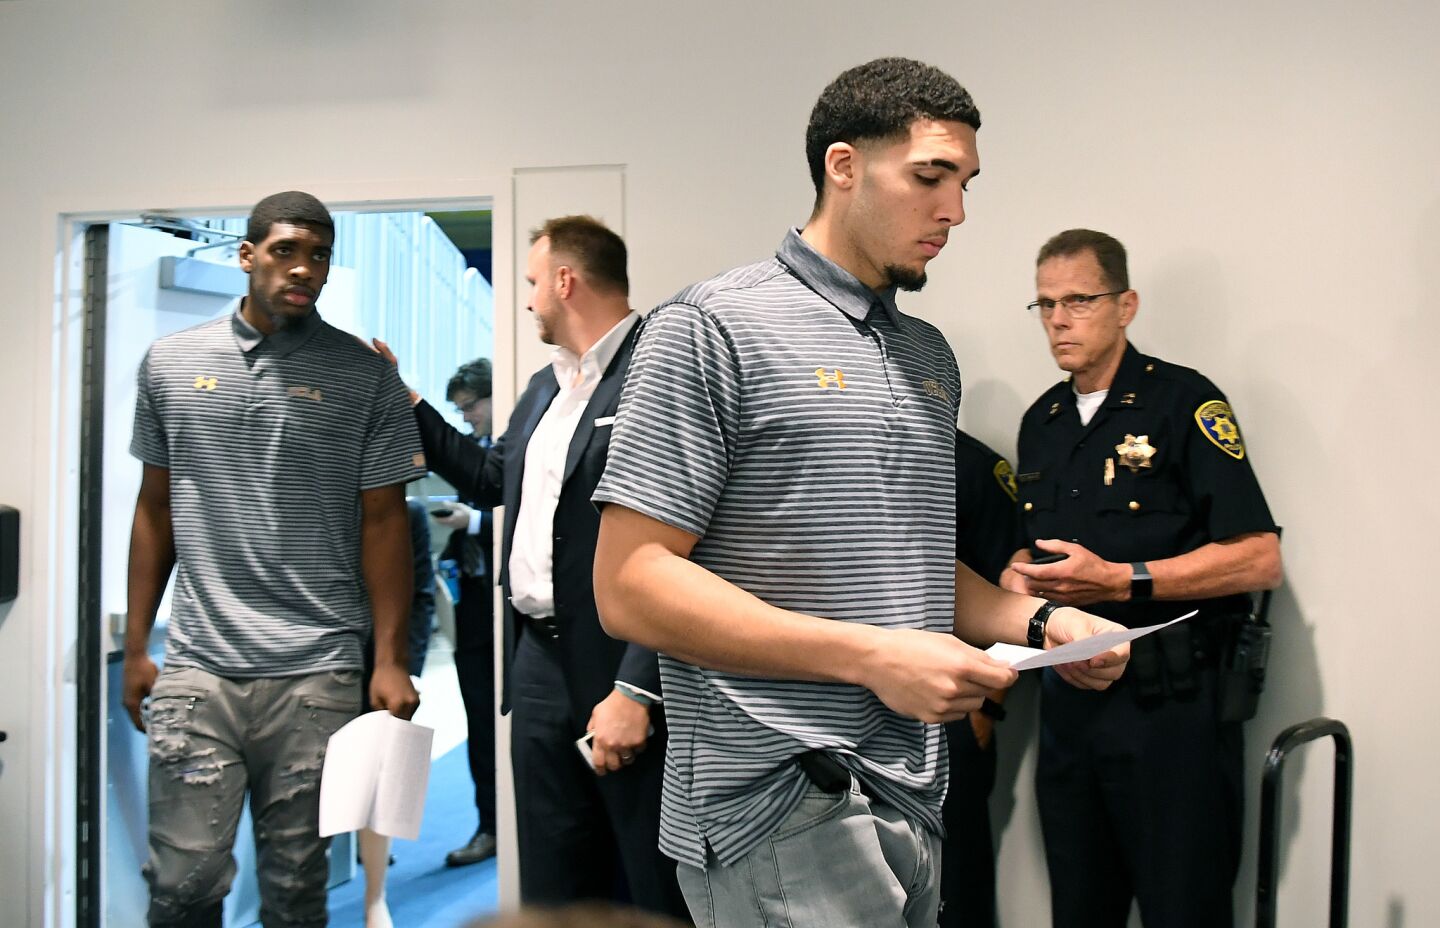 UCLA basketball players Cody Riley, left, and LiAngelo Ball arrive for a press conference at Pauley Pavilion.